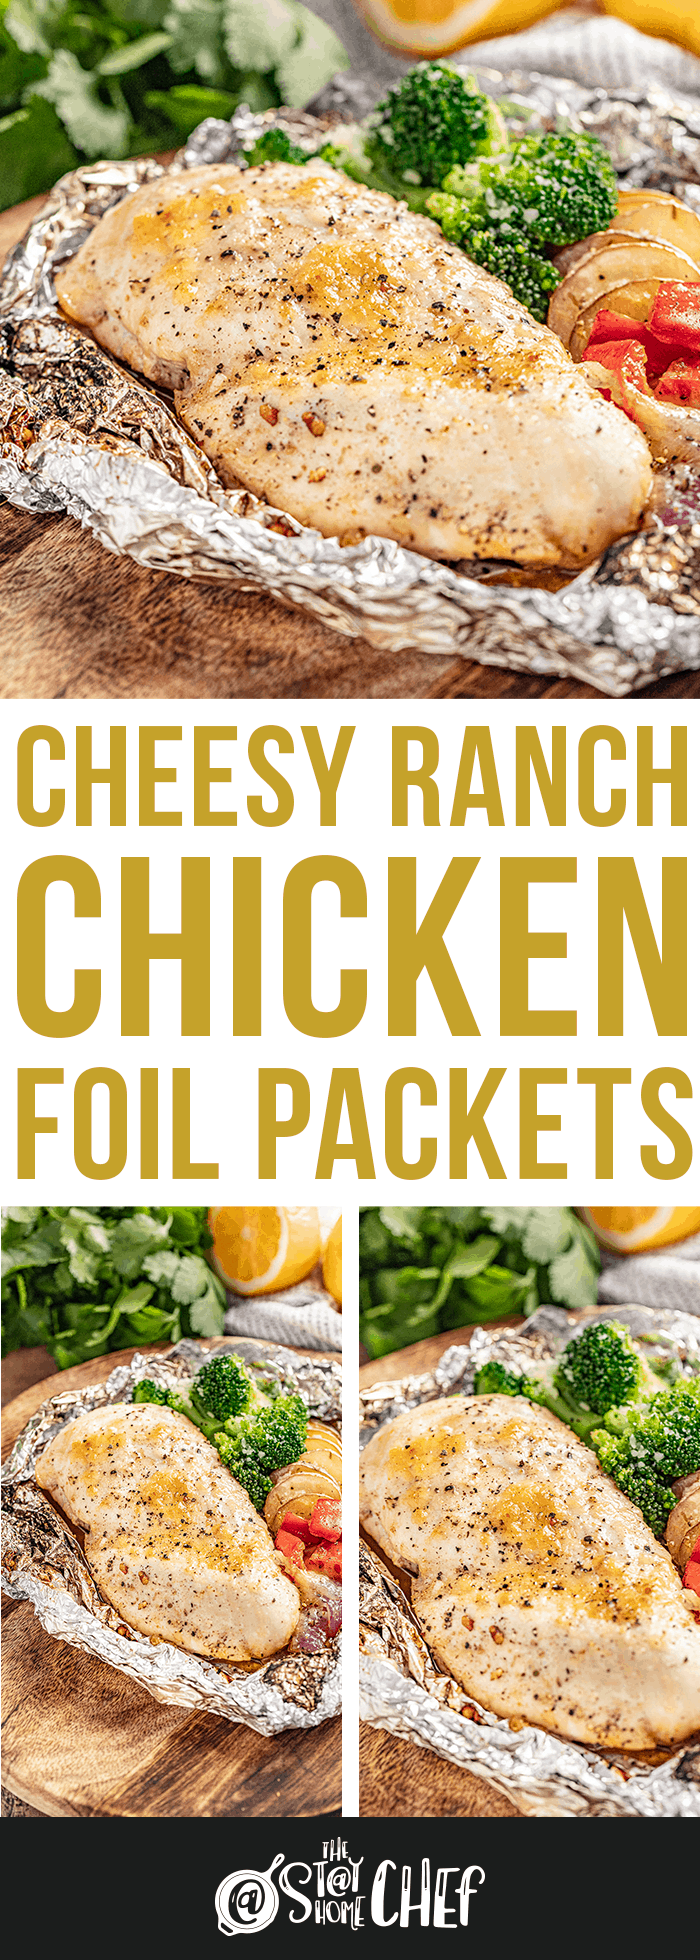 Cheesy Ranch Chicken Foil Packets